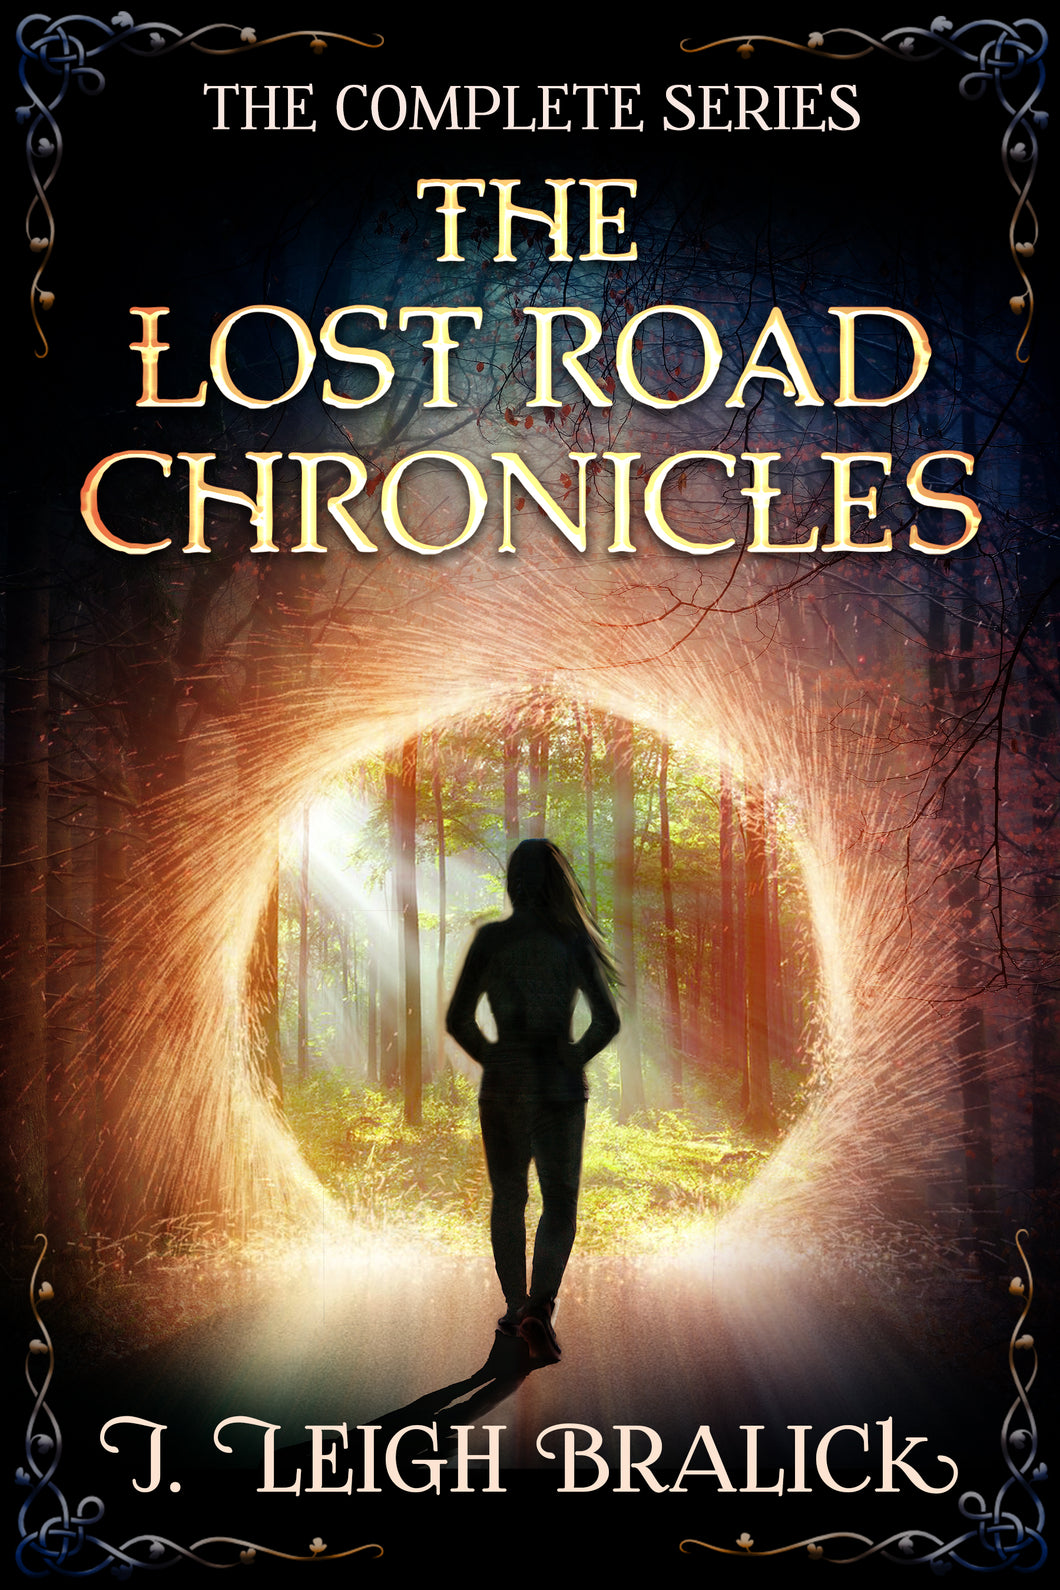 The Lost Road Chronicles: The Complete Series